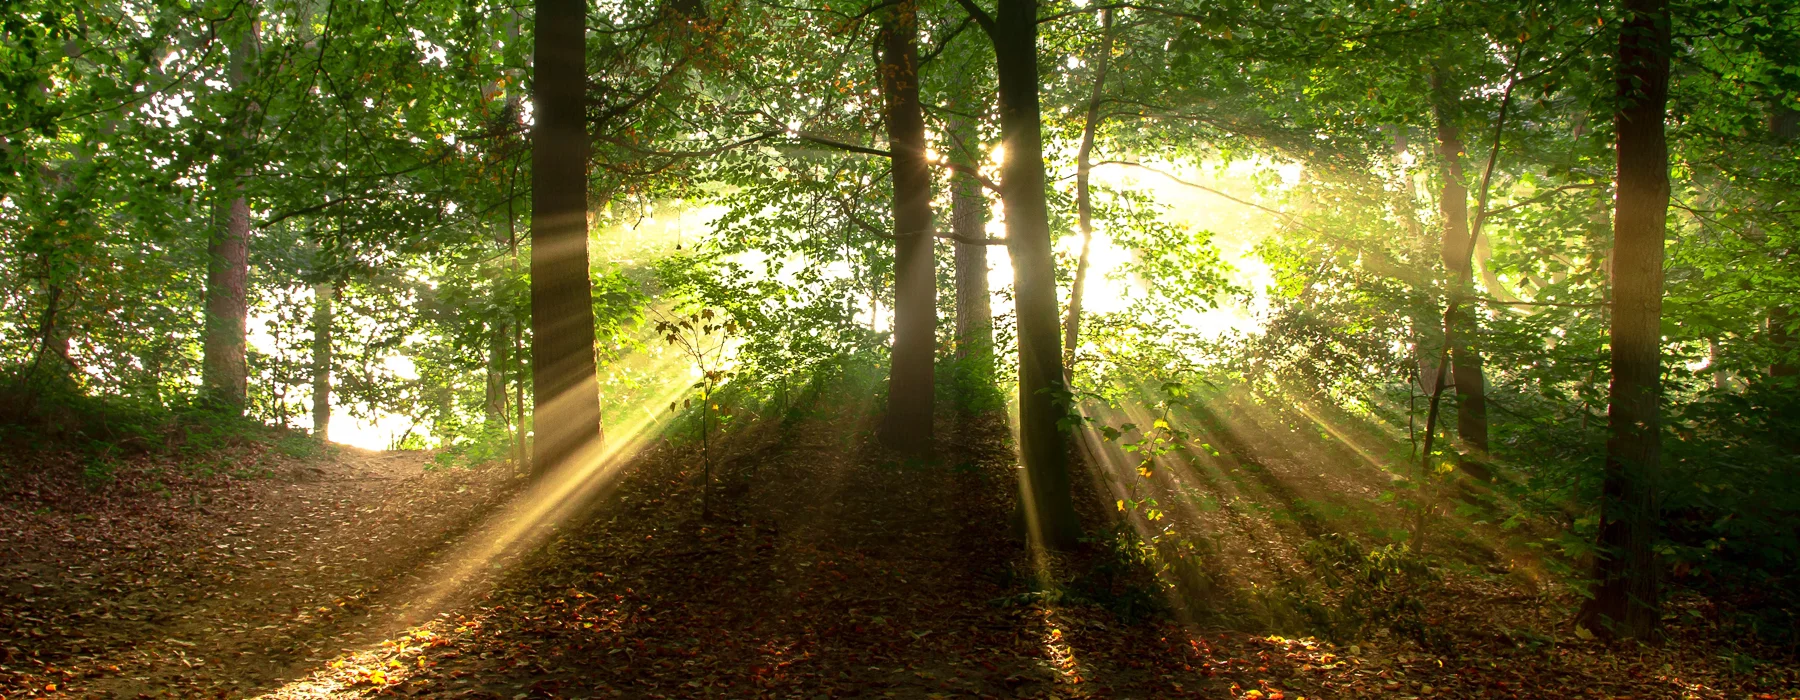 Trees in a forest with a thick canopy of branches covered in leaves leaving enough space for sunlight to shine through